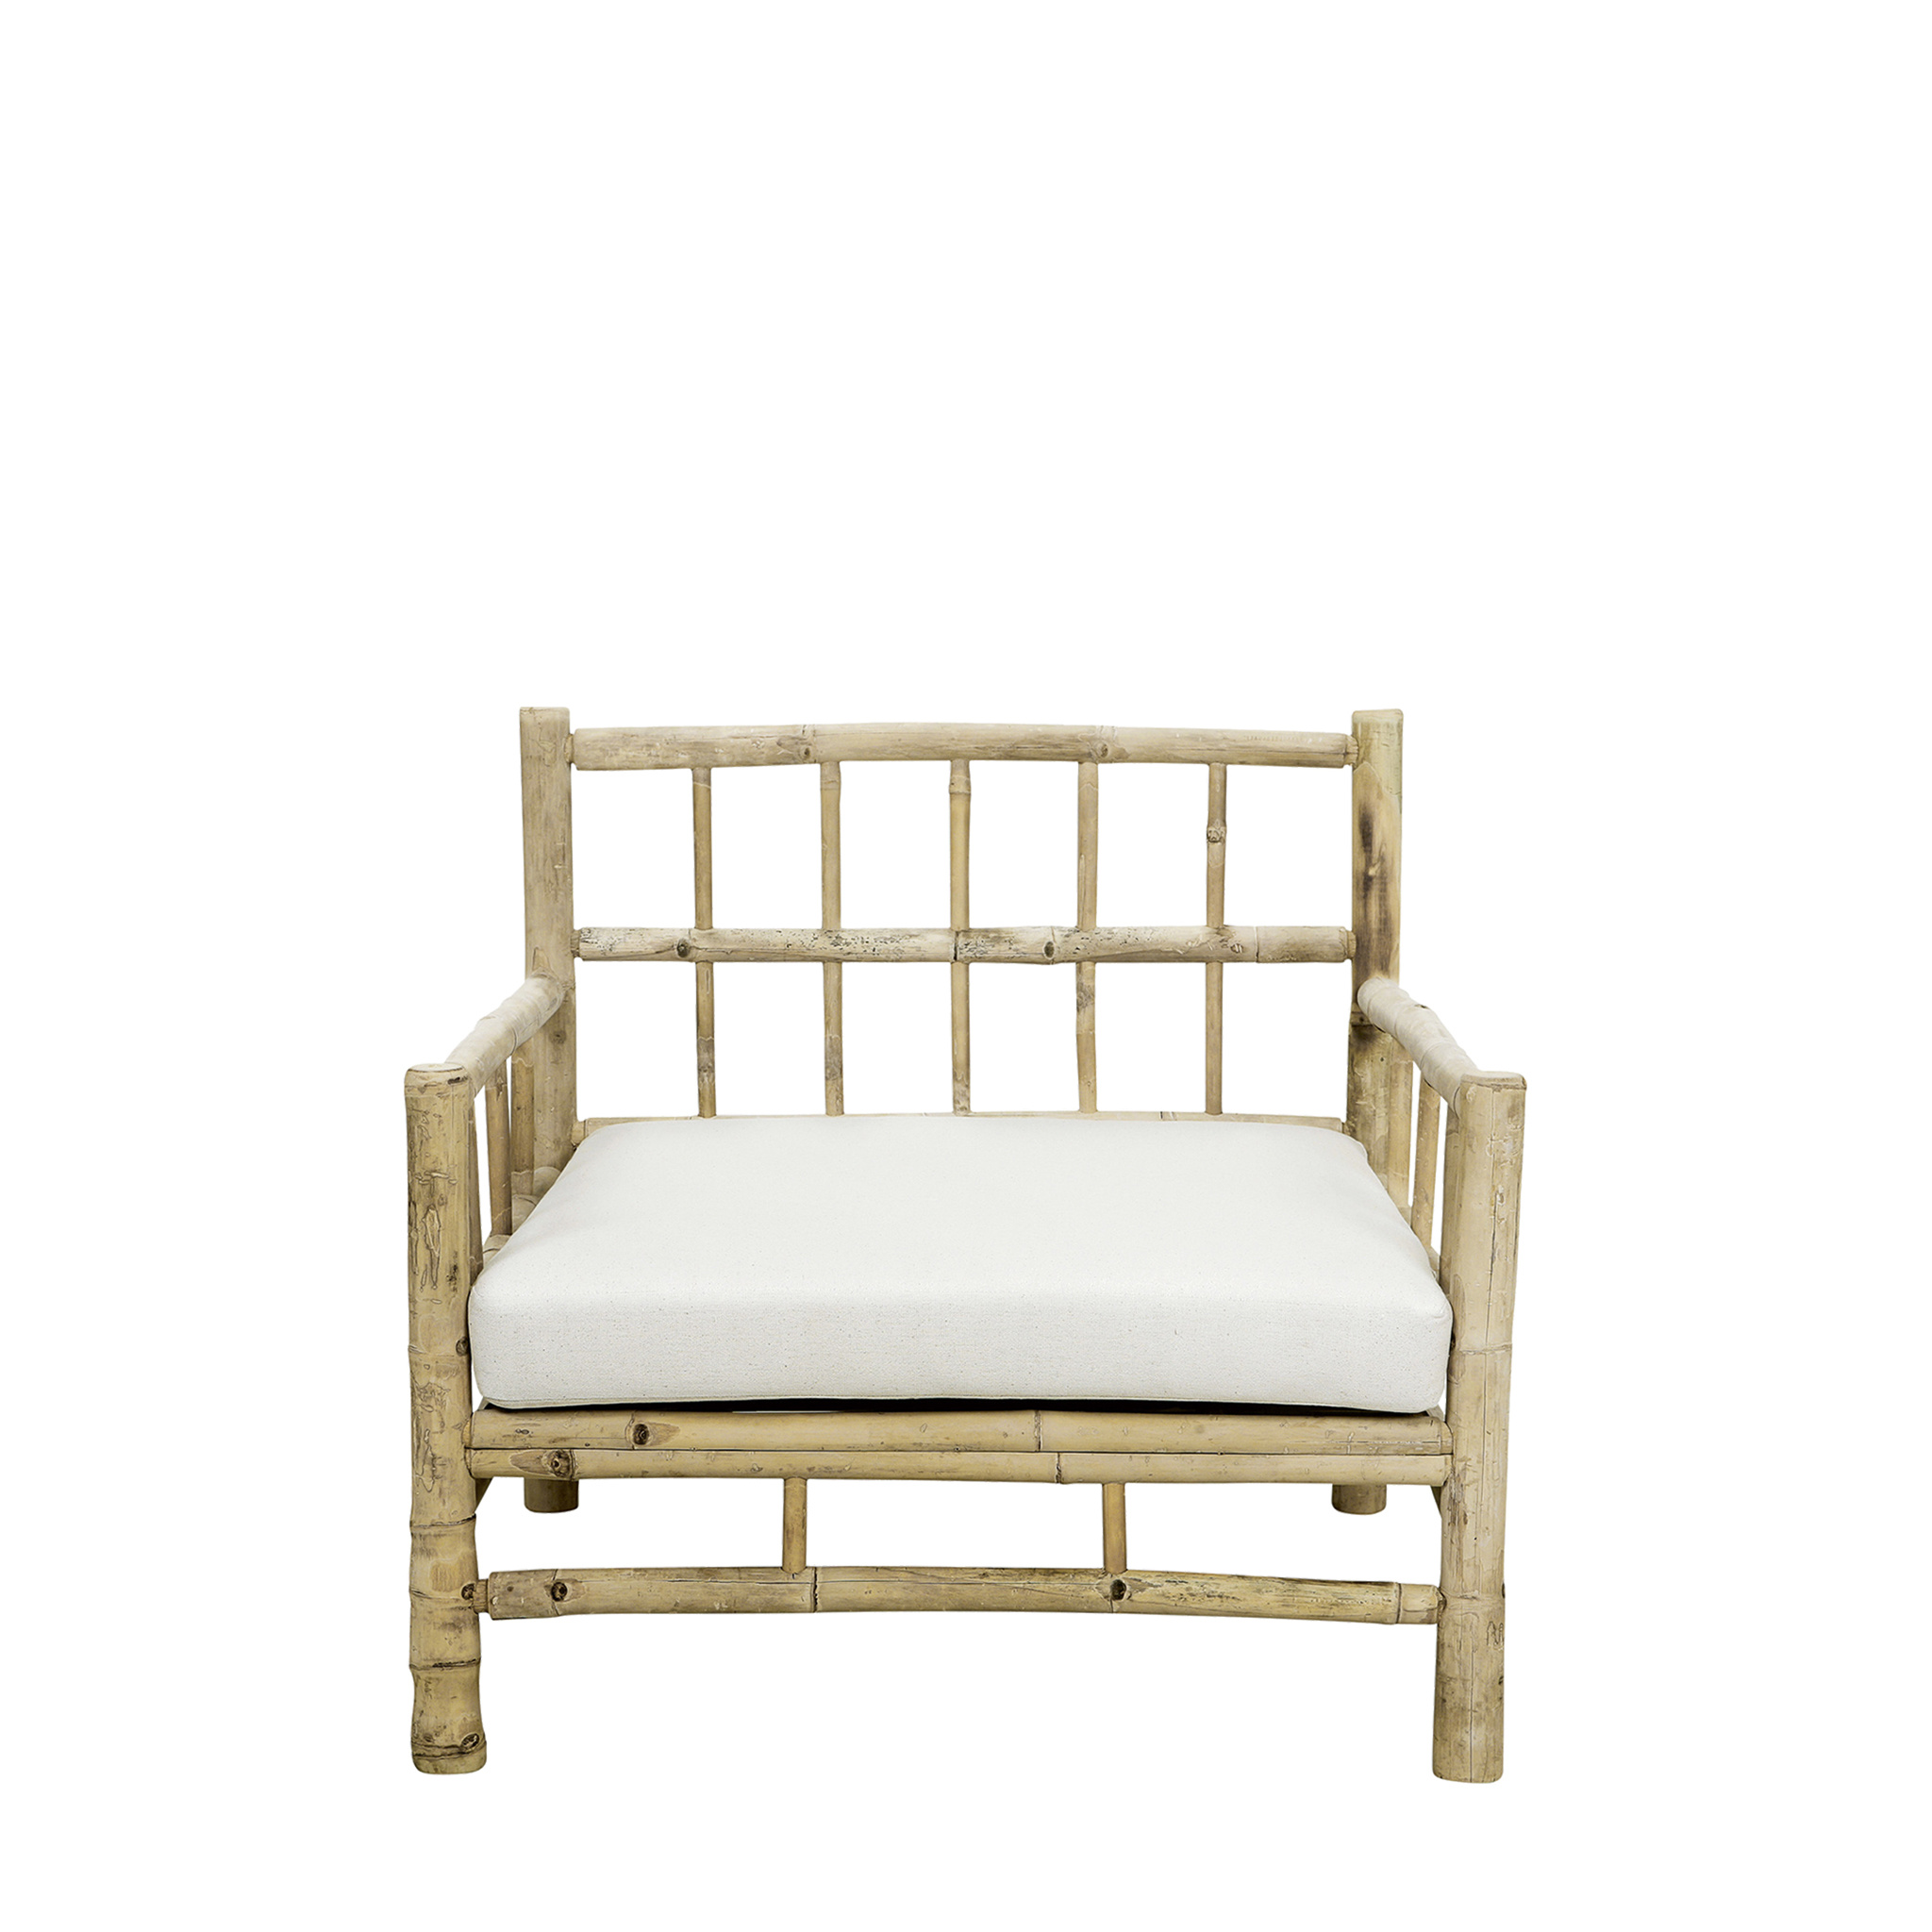 Couleur Locale • Bamboo lounge chair with white mattress Couleur